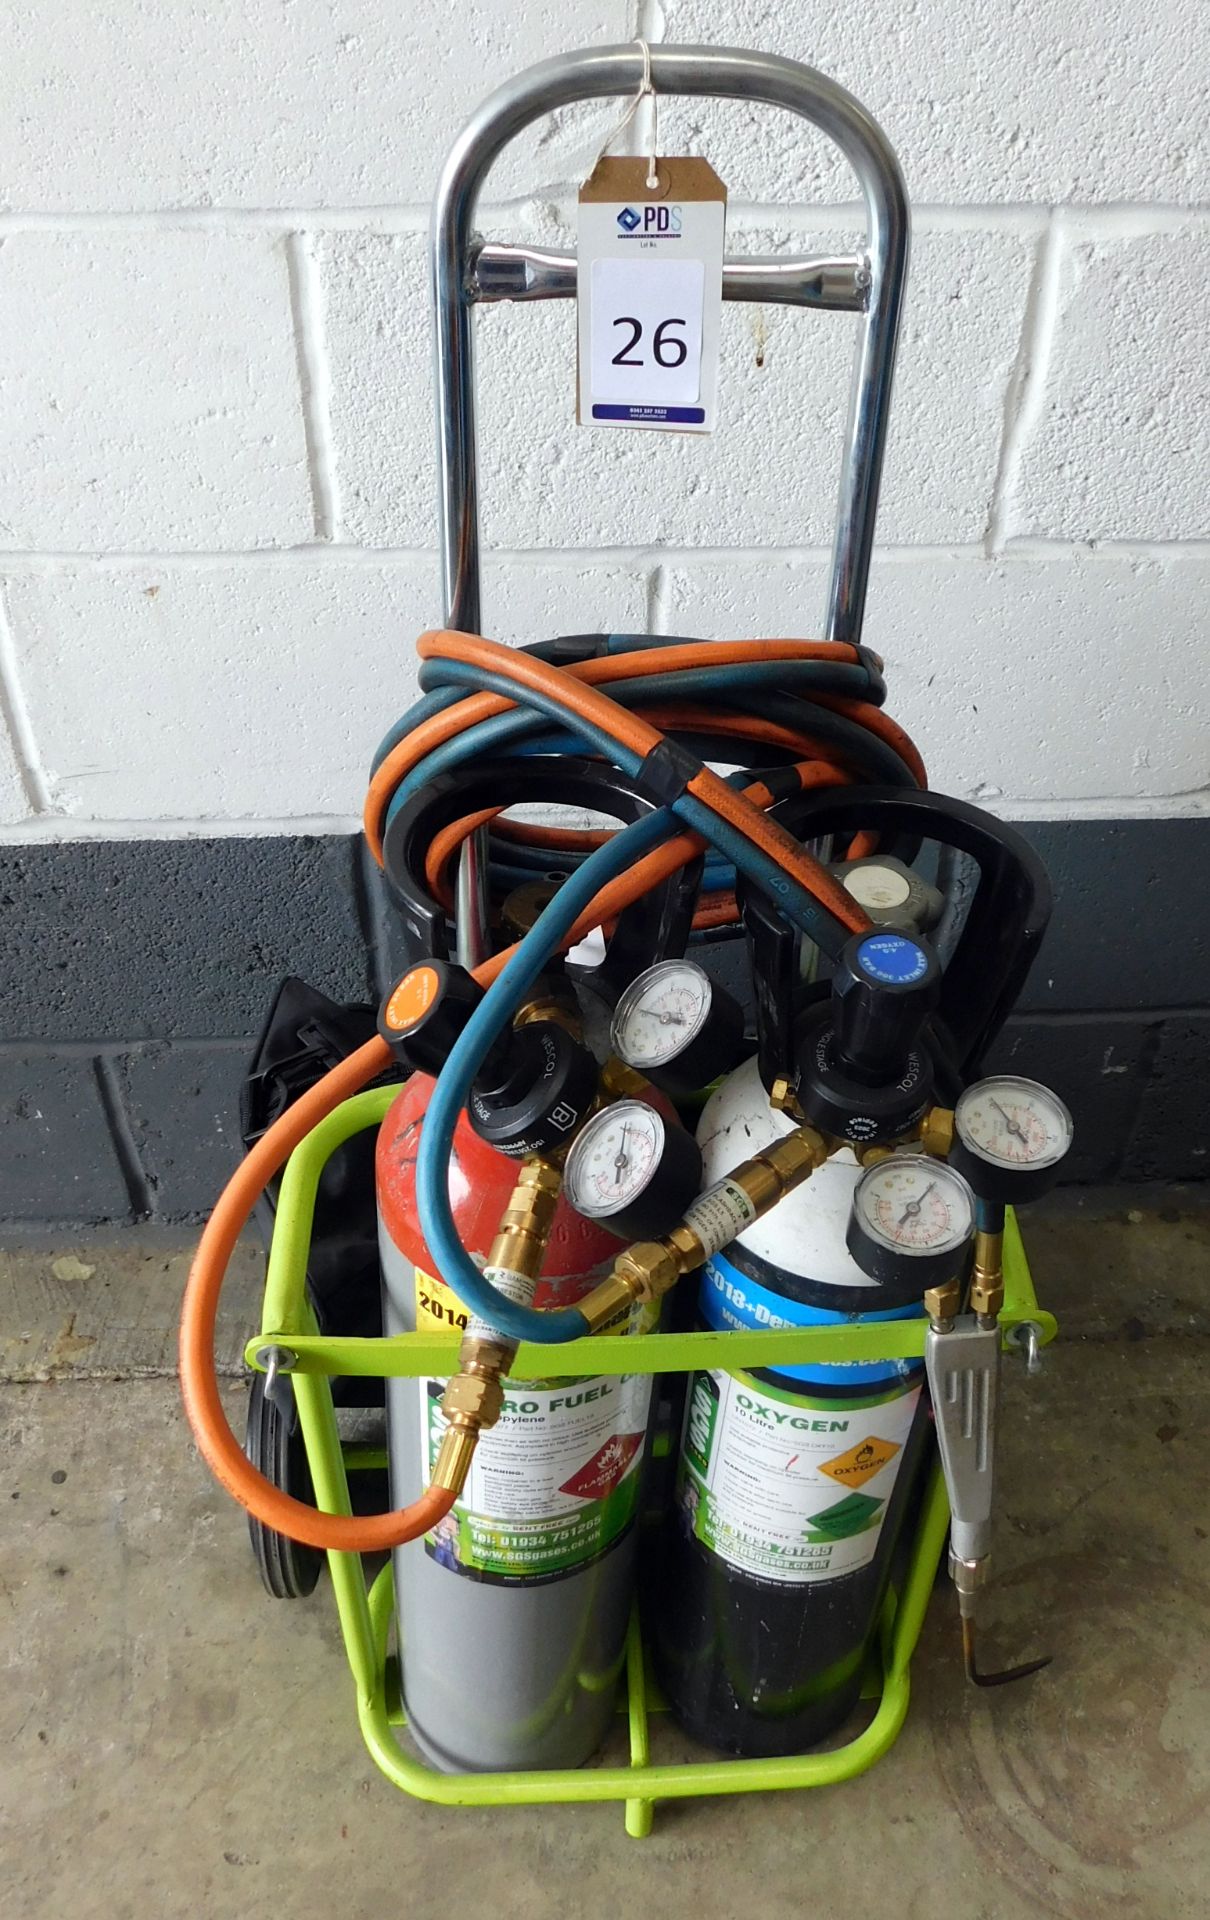 Propane Welding Set And Small Trolley (Excludes Cylinders)